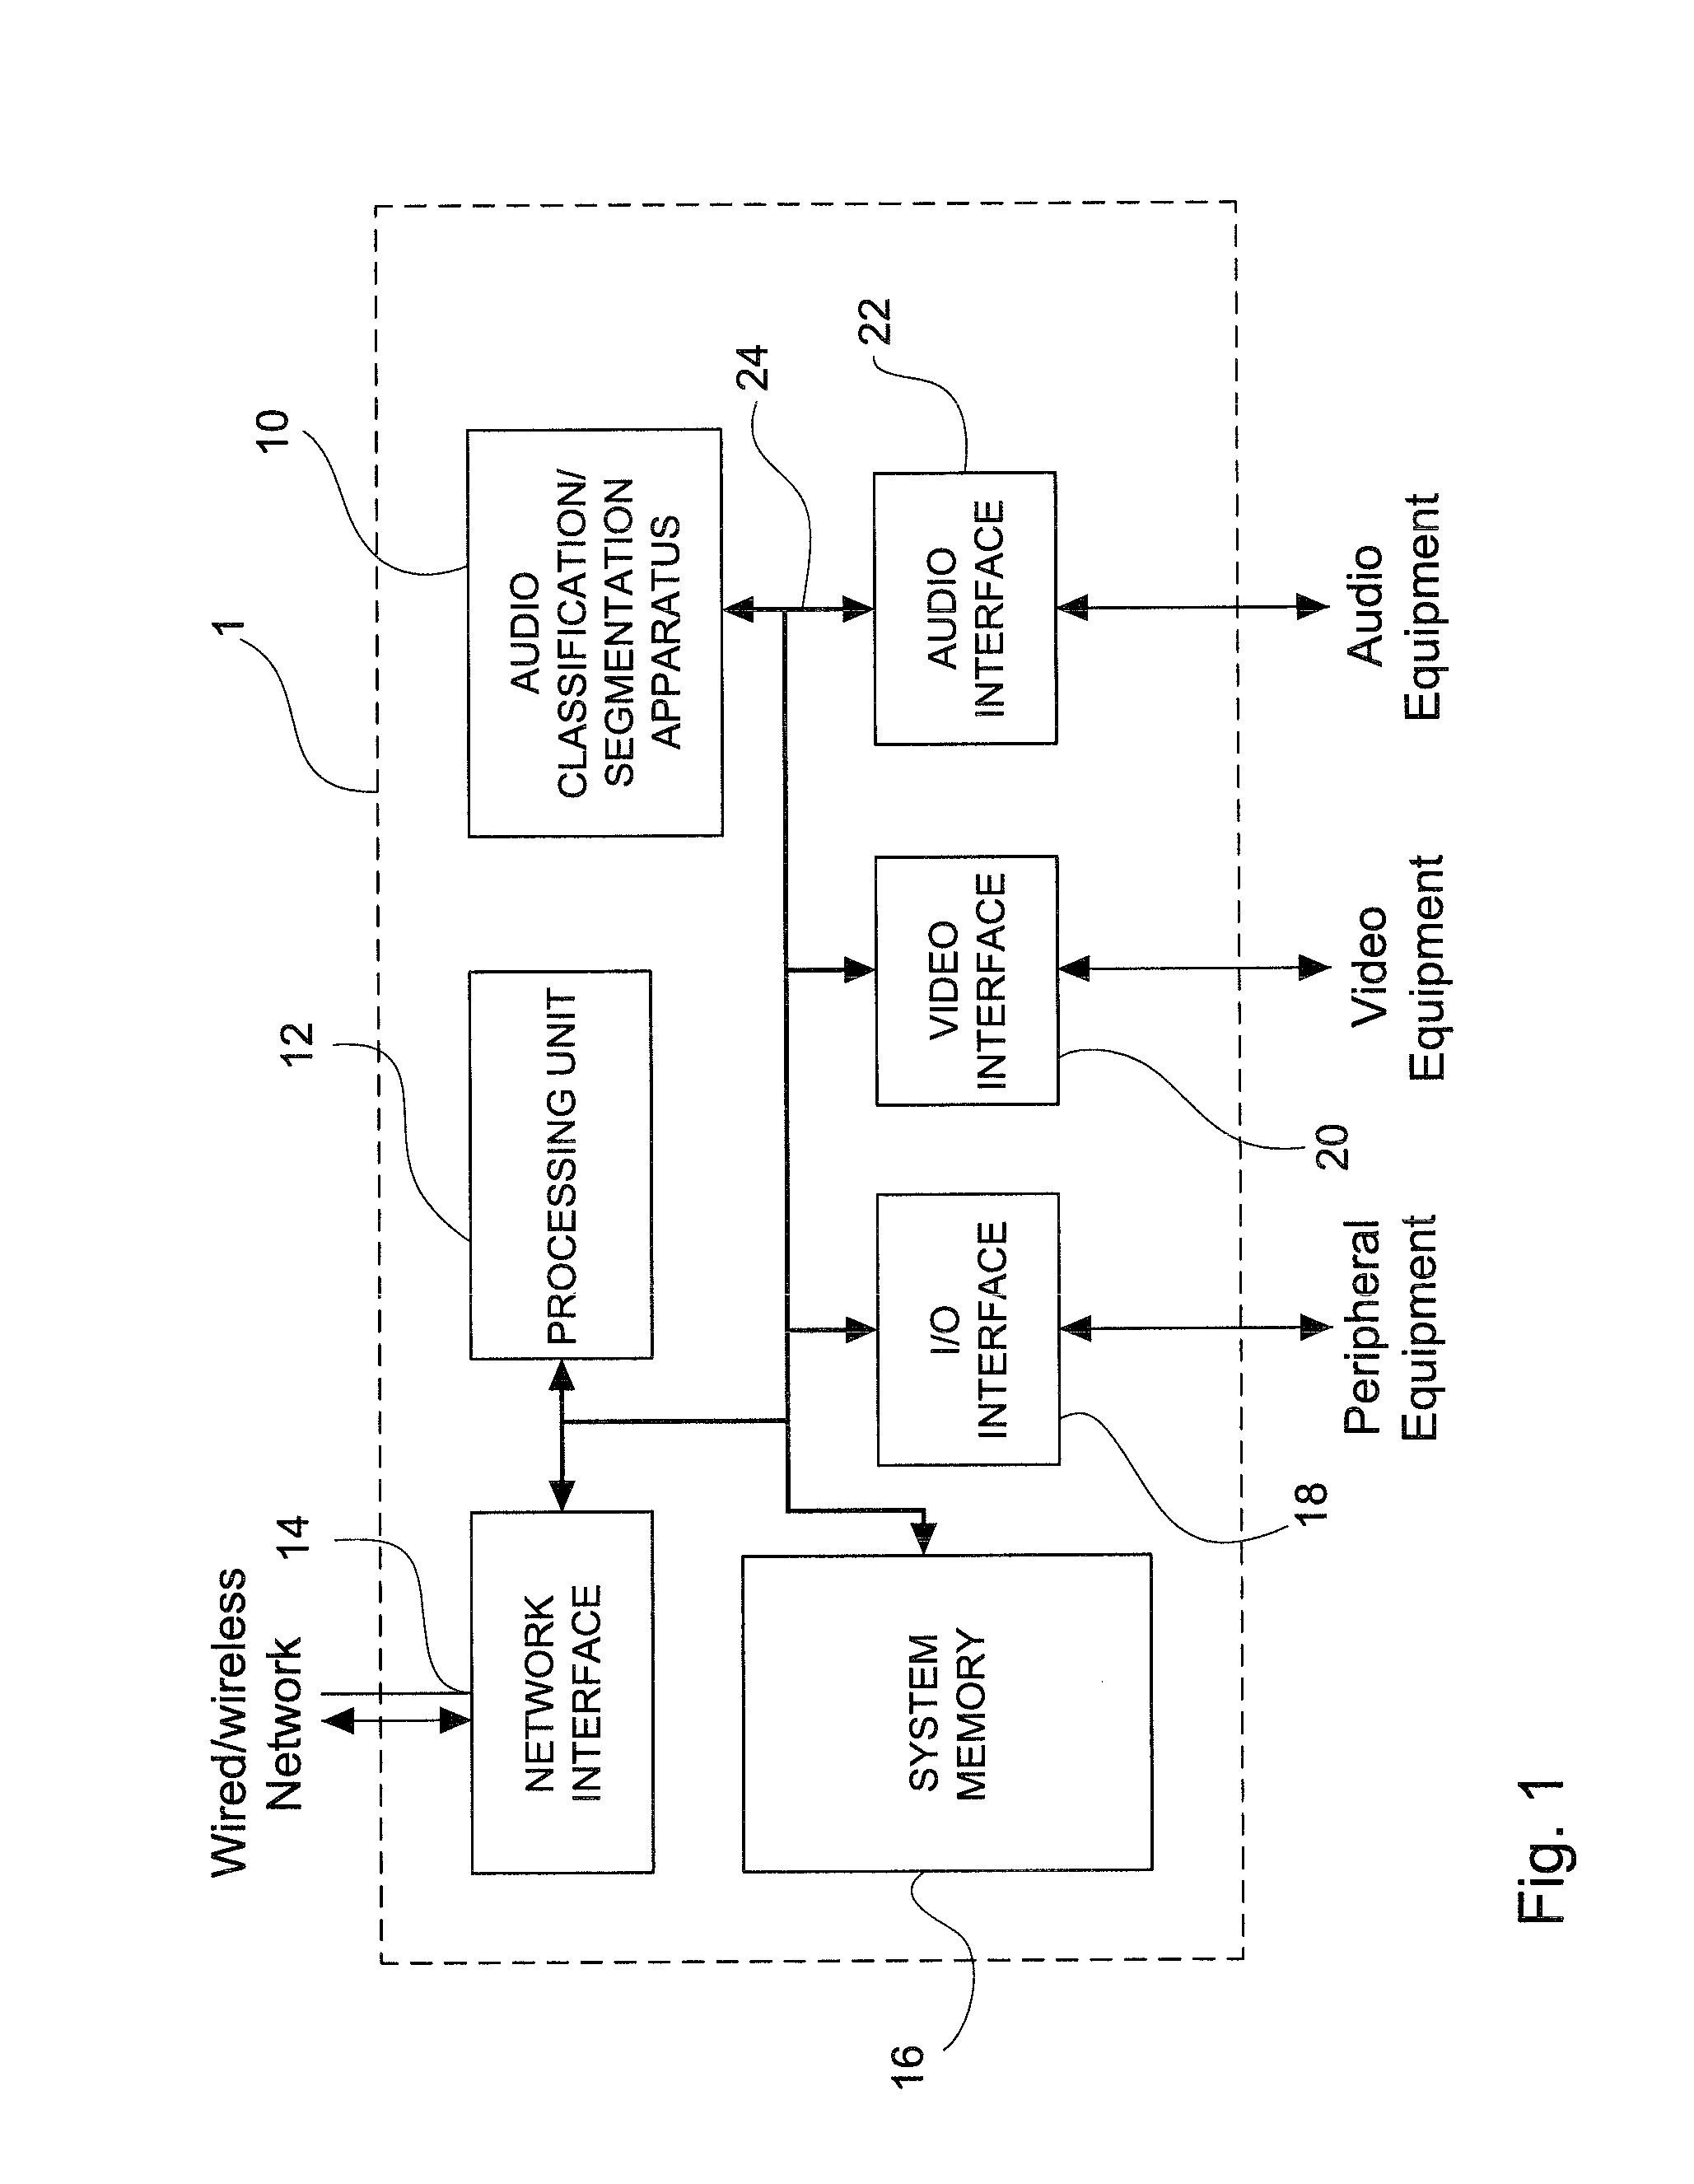 Apparatus and method for classification and segmentation of audio content, based on the audio signal